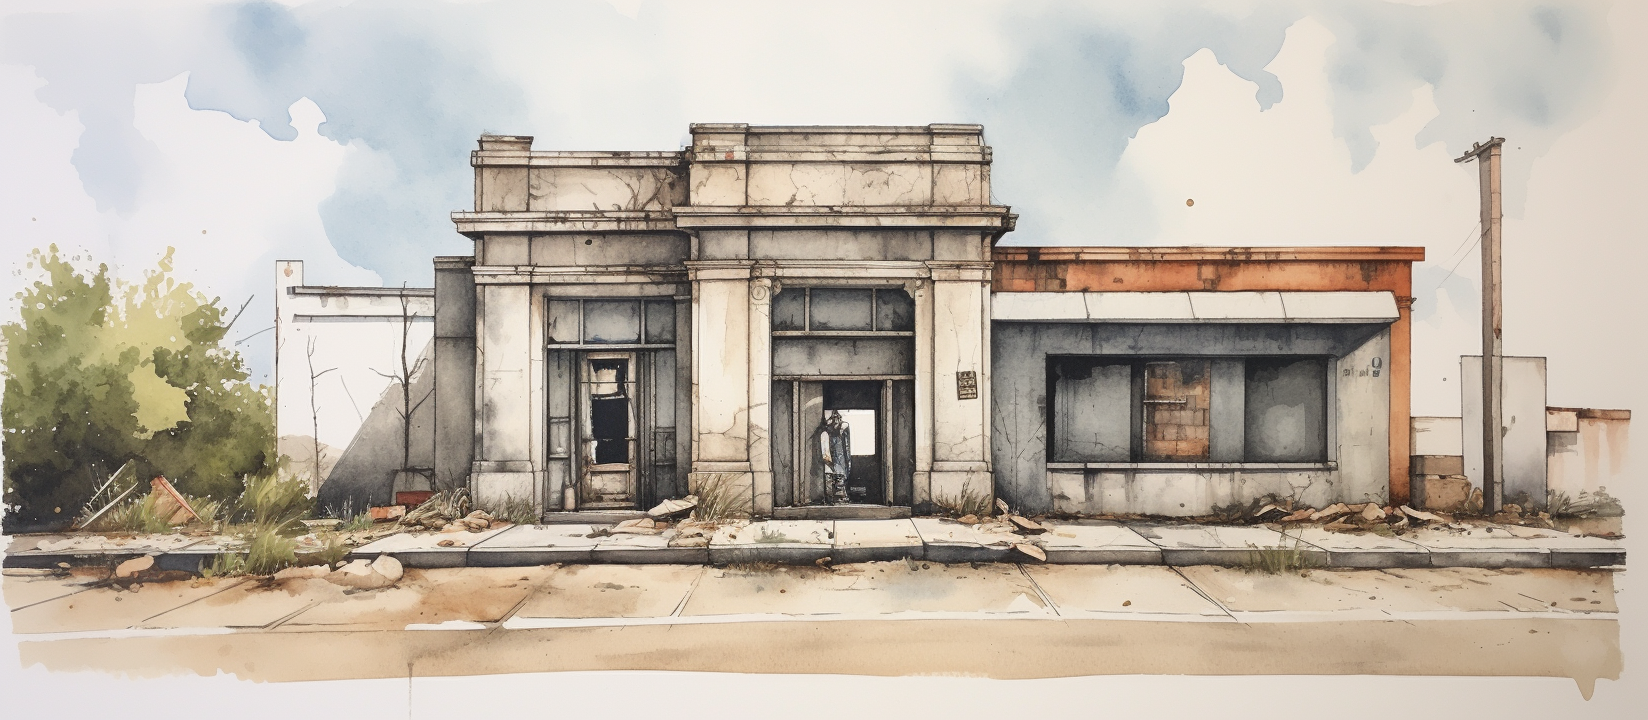 empty_abandoned_bank_building_watercolor_drawi_8157466c-3302-4224-adcd-93b87d8d2268.png